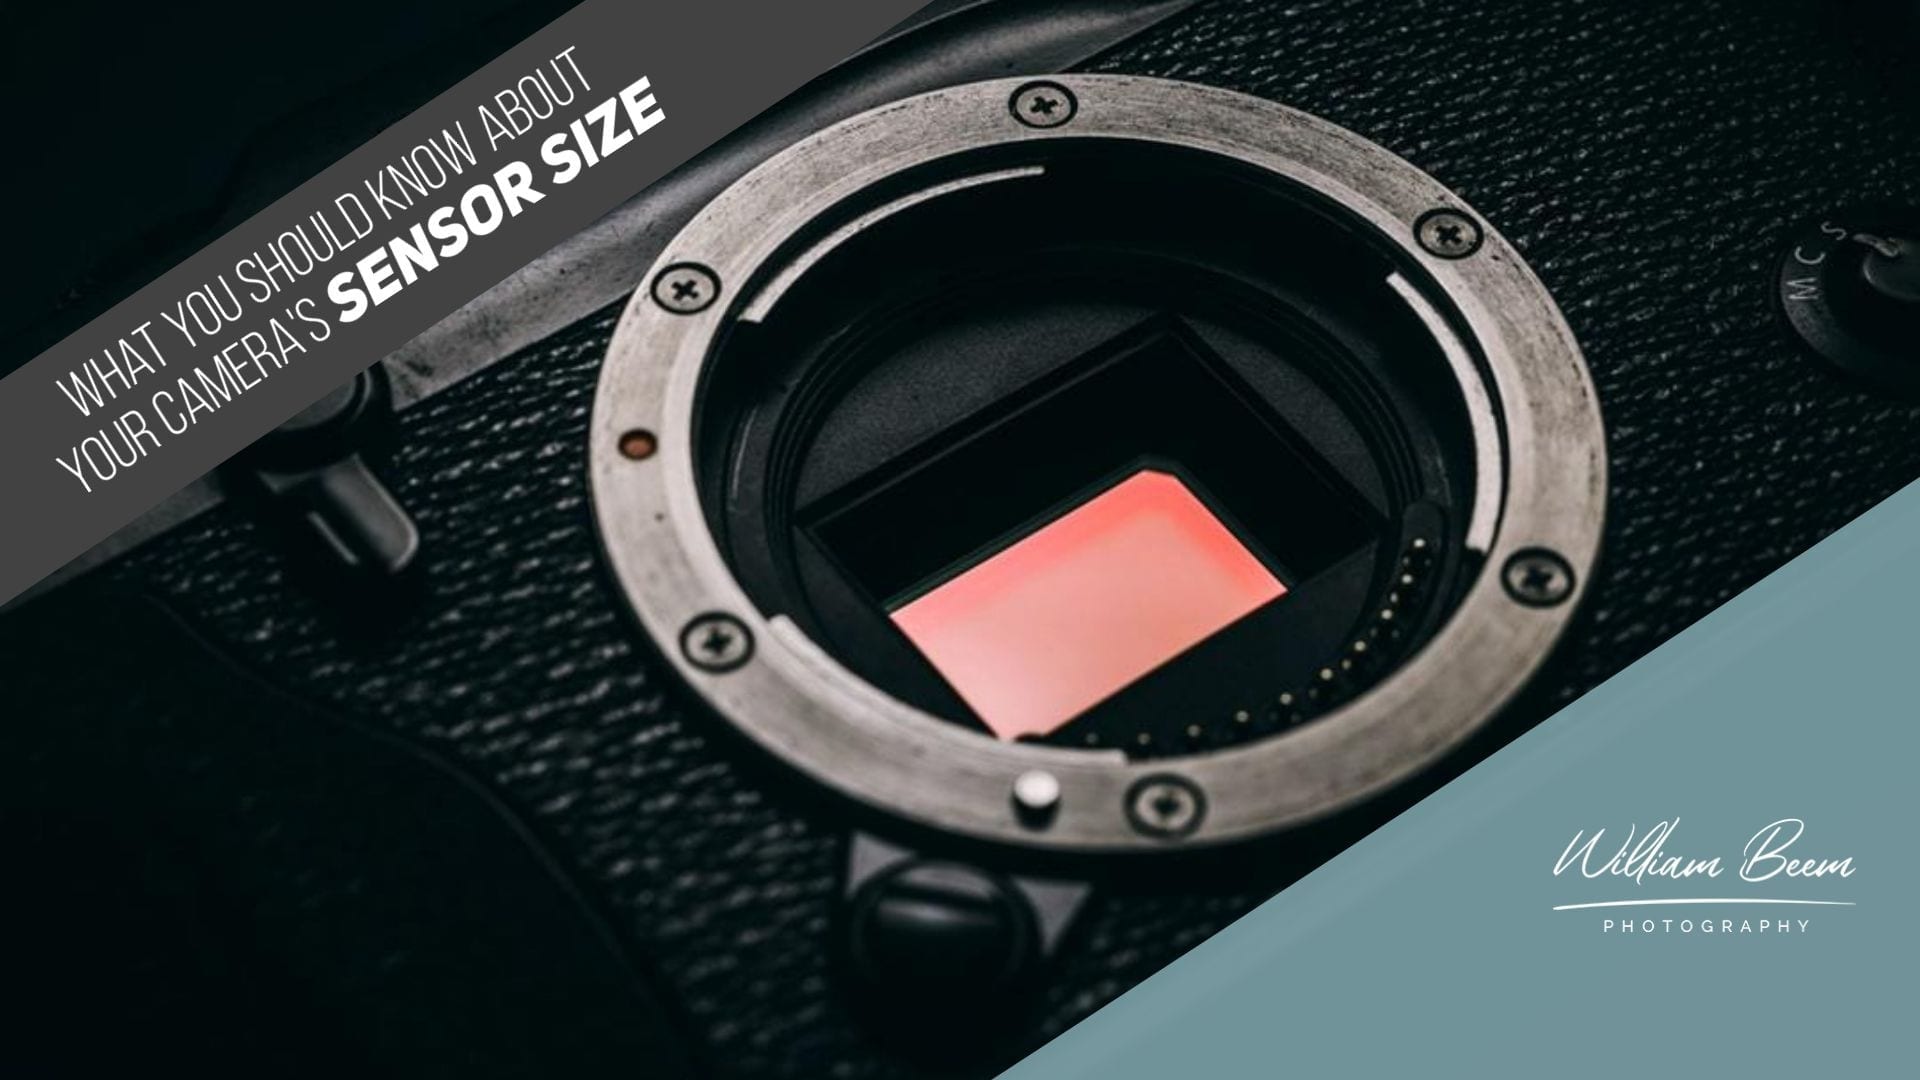 What You Should Know About Your Camera’s Sensor Size